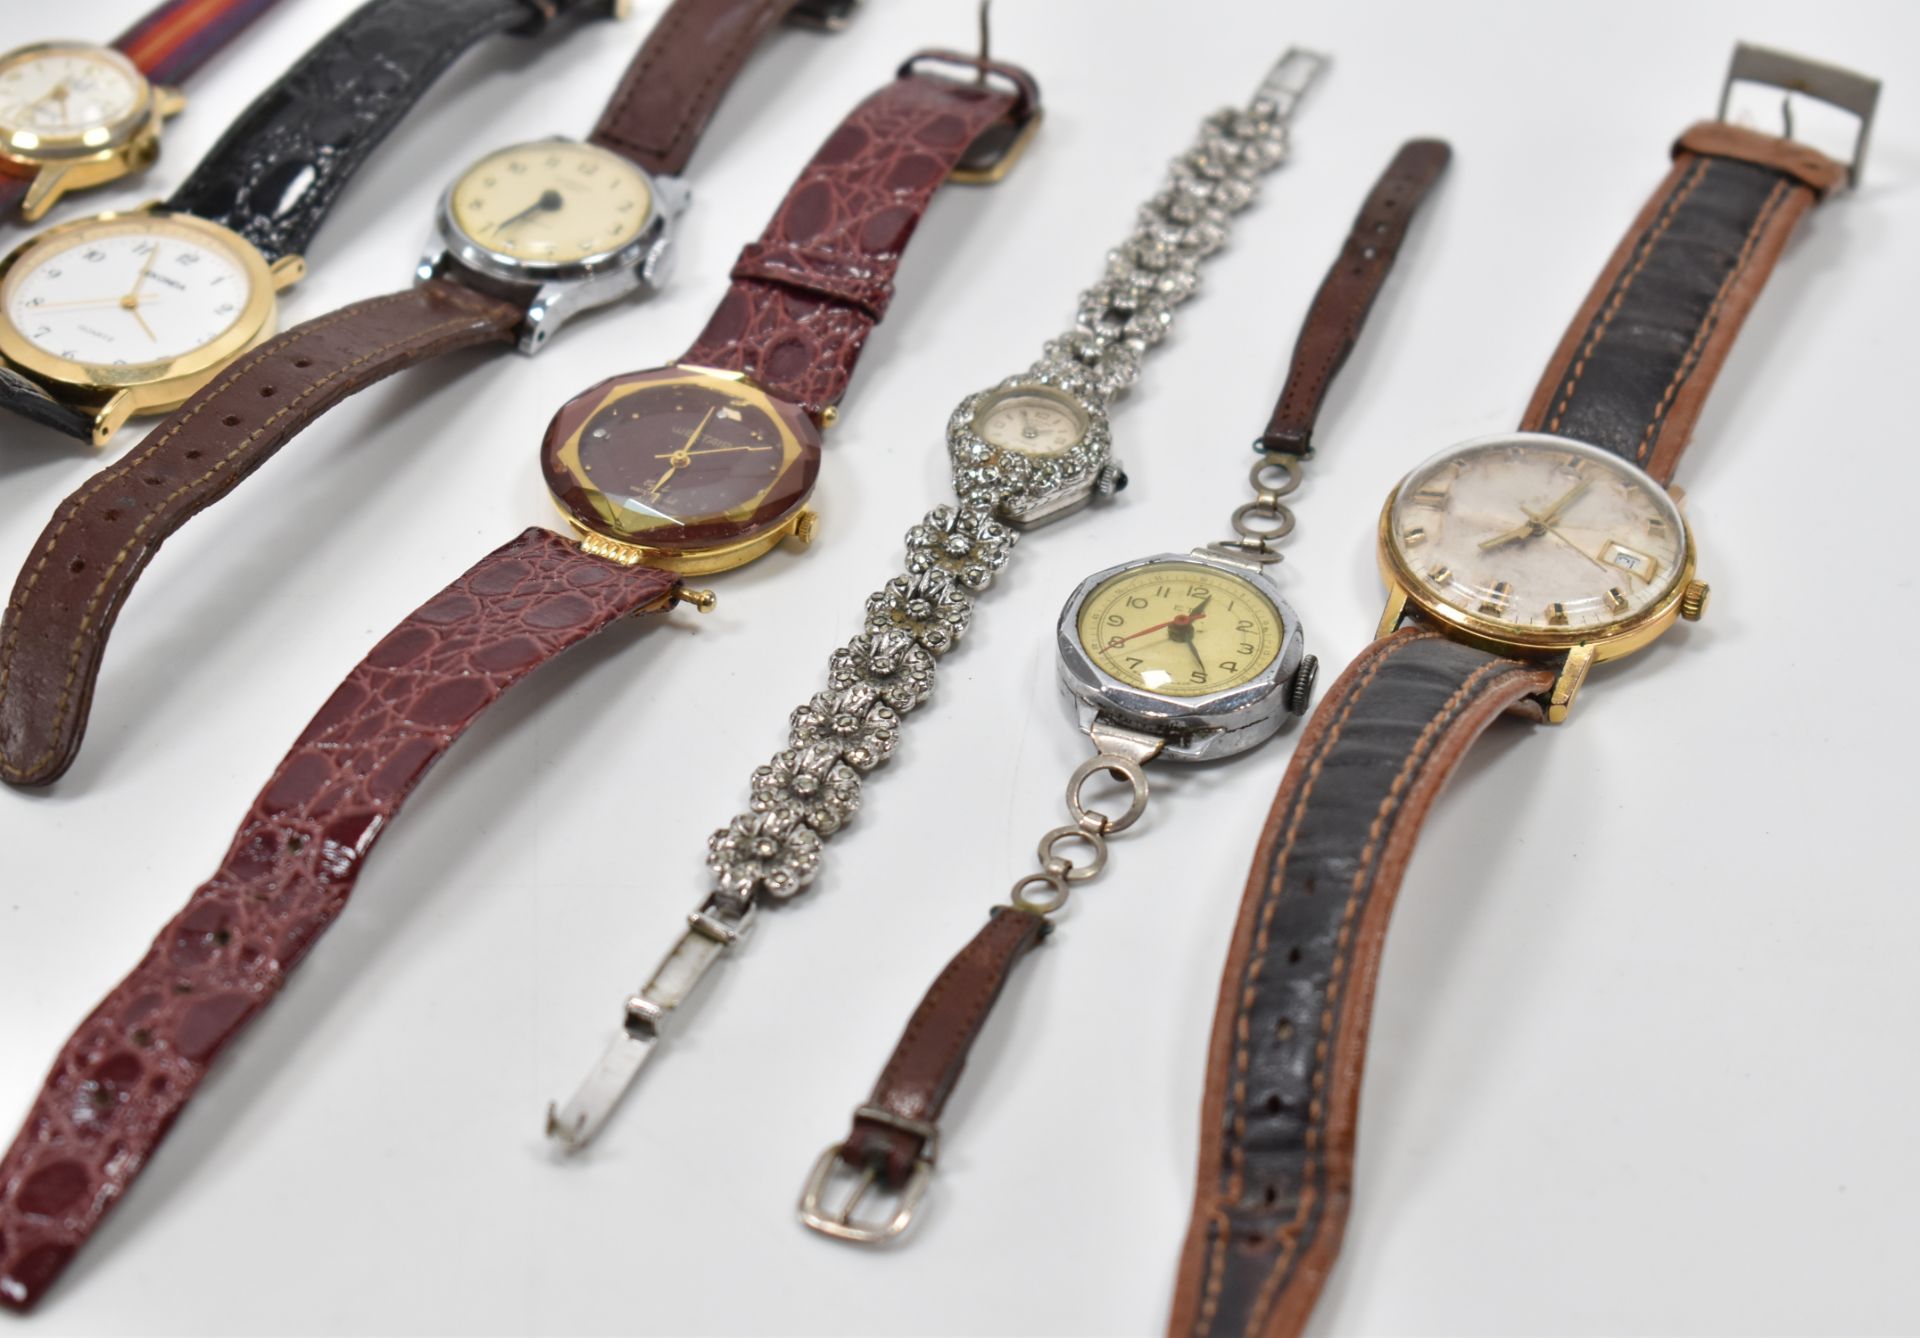 COLLECTION OF VINTAGE WRIST WATCHES - Image 4 of 4